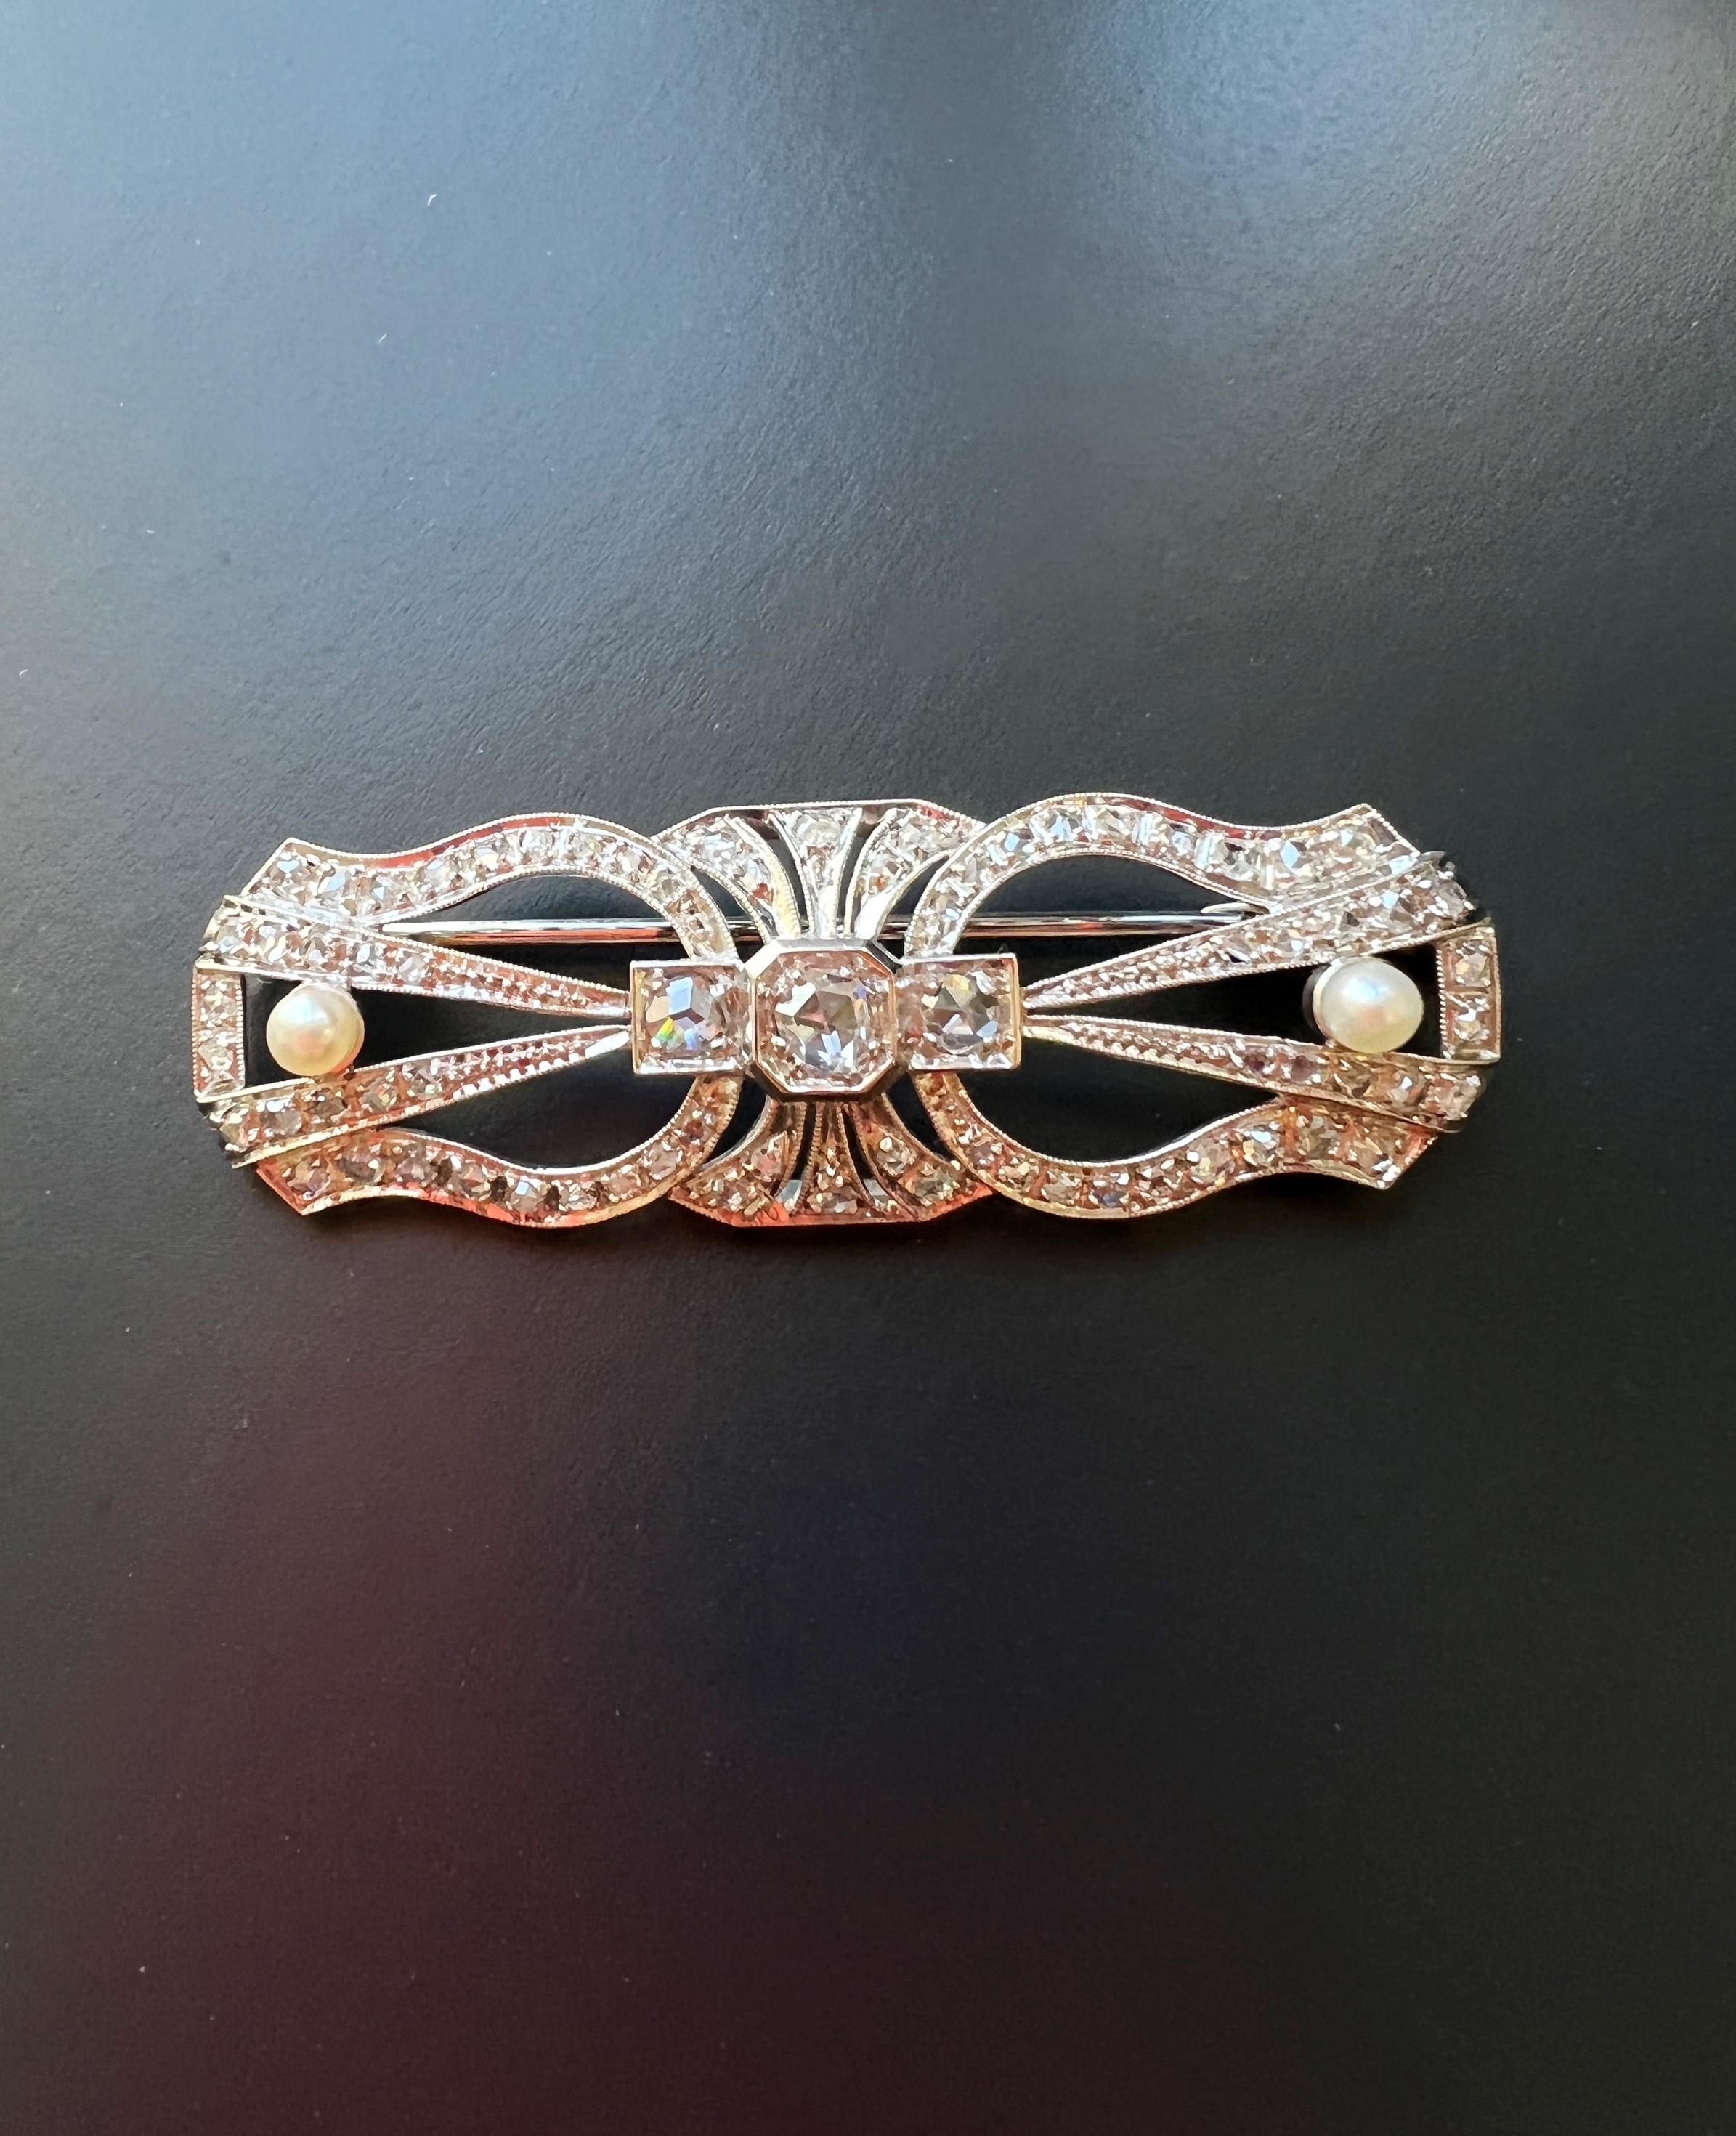 Geometric, elegant and extra sparkling, here for sale a stunning French vintage brooch from the Art Deco era. The brooch is entirely pavé set with 73 diamonds in rose cut style with 3 important ones in the center. The diamonds are mounted in